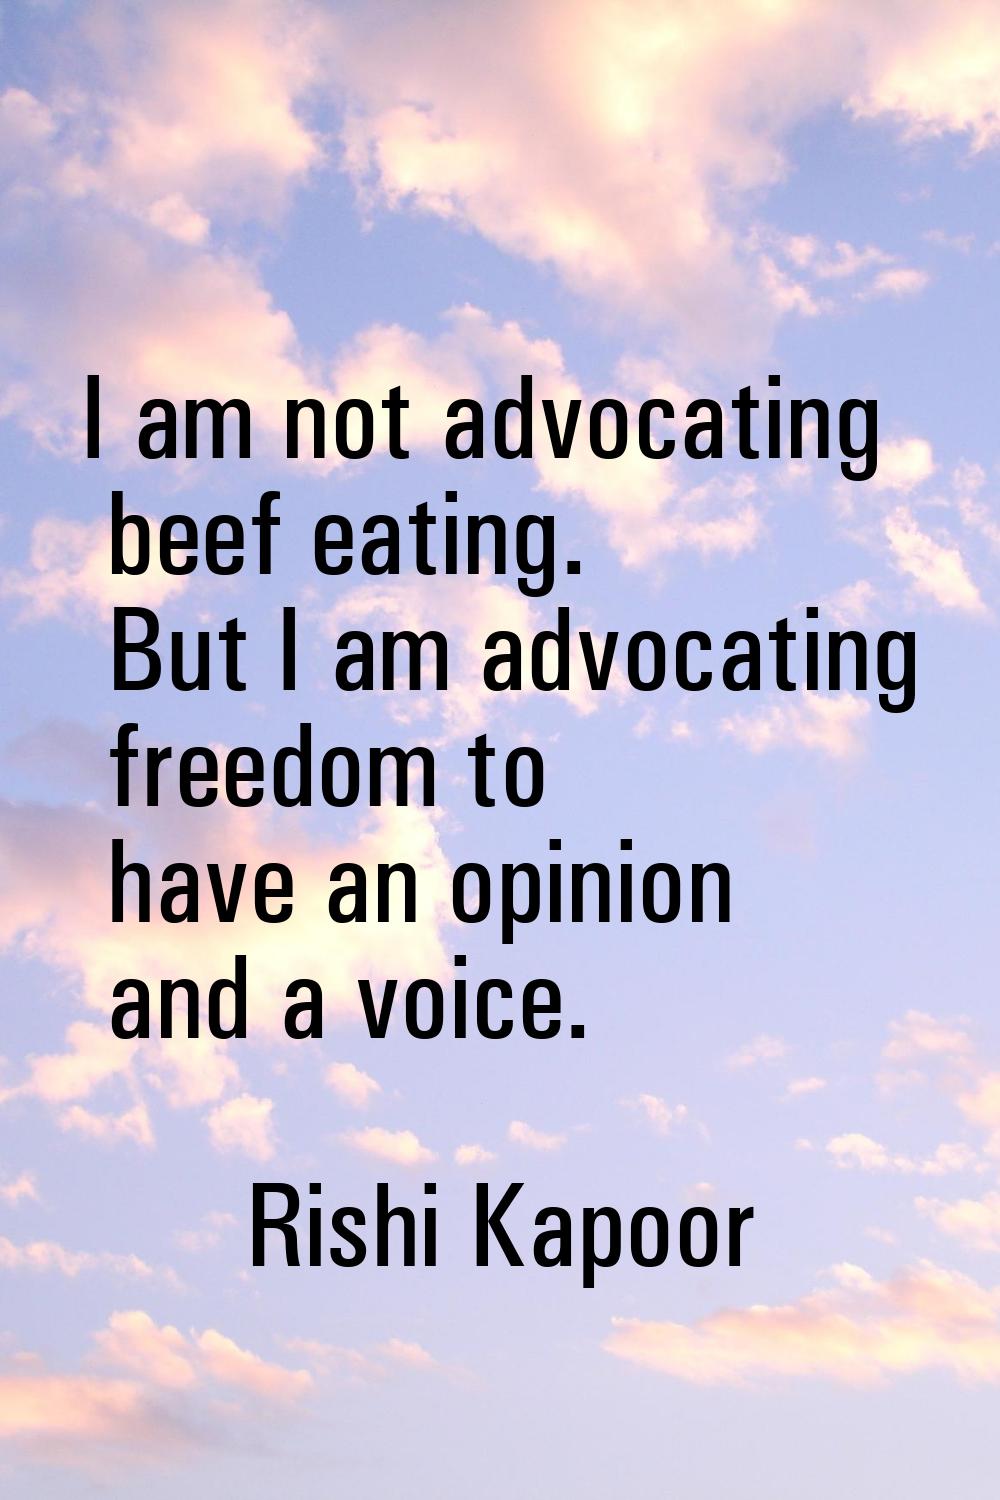 I am not advocating beef eating. But I am advocating freedom to have an opinion and a voice.